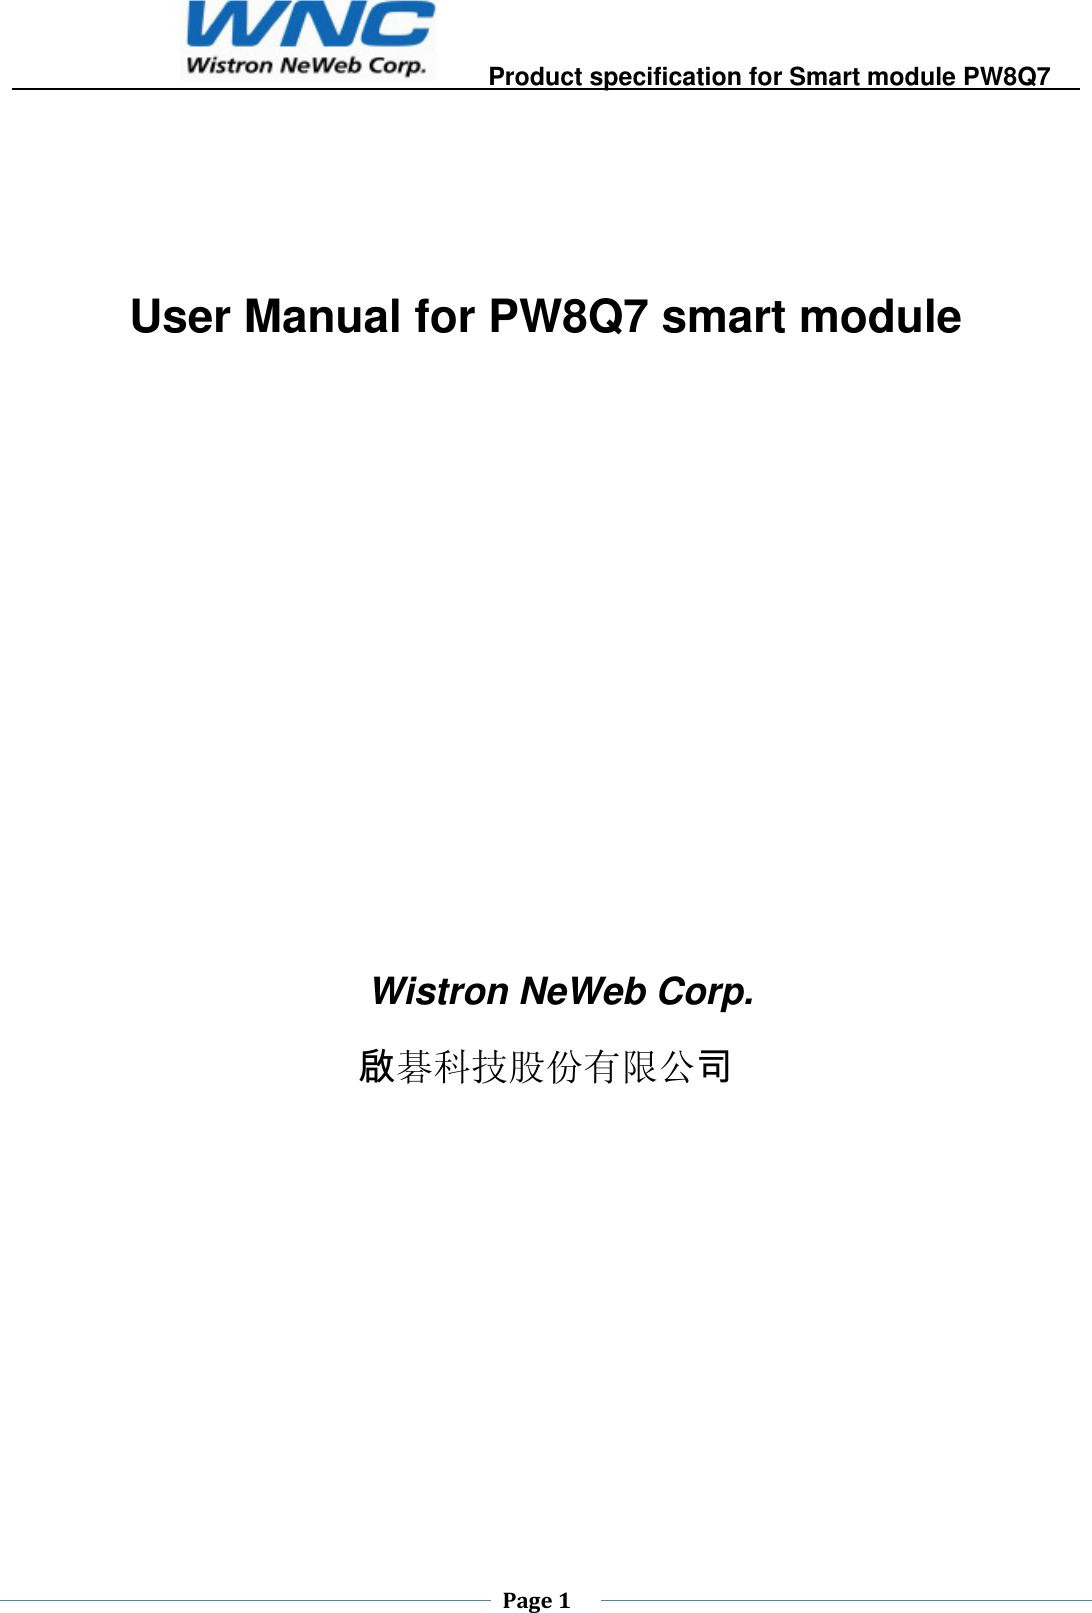                                         Product specification for Smart module PW8Q7         Page1   User Manual for PW8Q7 smart module         Wistron NeWeb Corp. 啟碁科技股份有限公司           